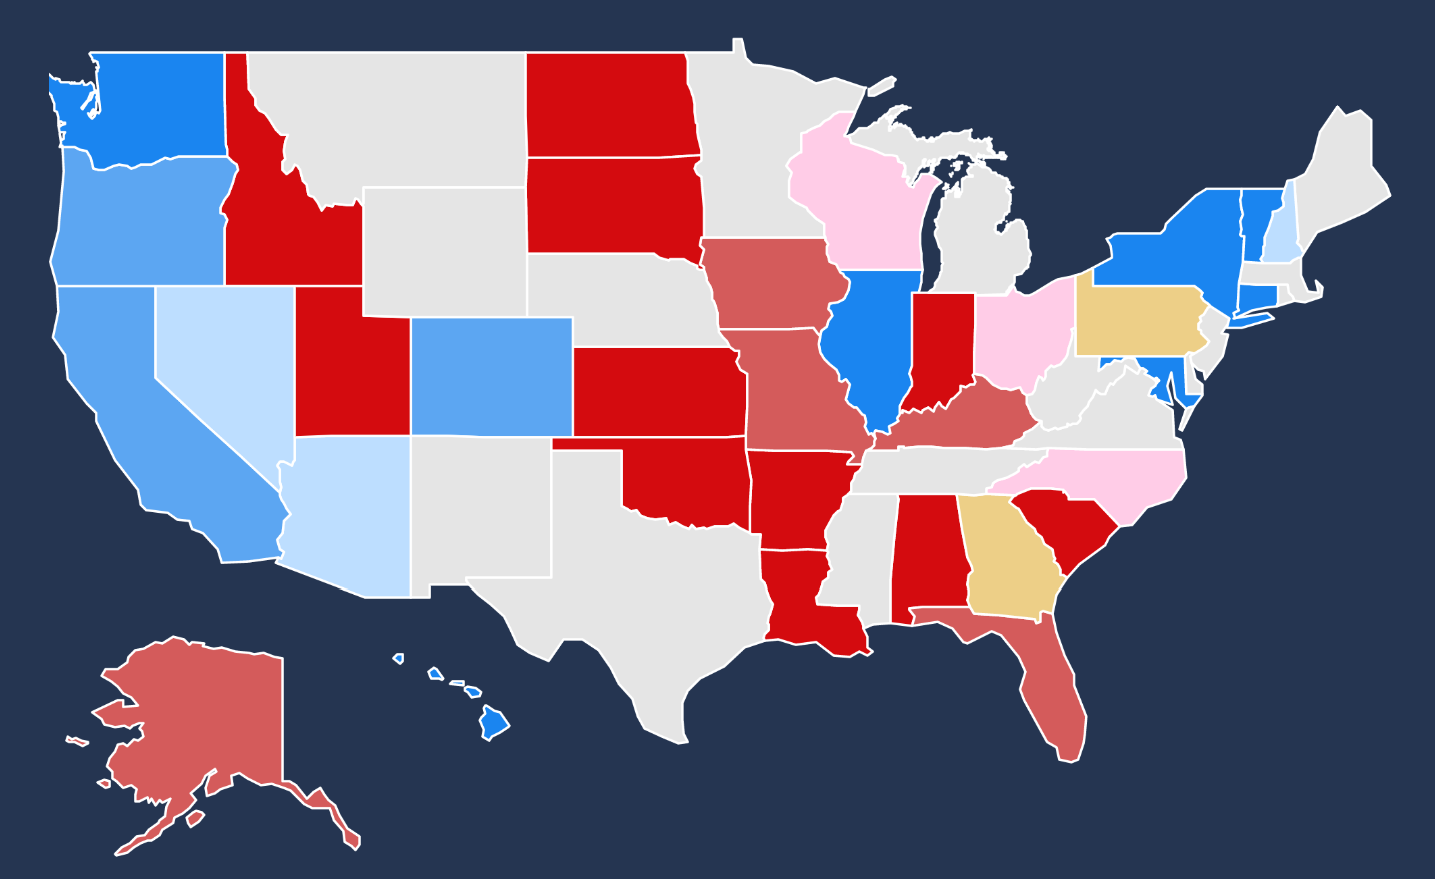 Senate Forecast - Predictions for the 2022 Senate Election, by one of the nation’s best forecasters. Updated after every poll.